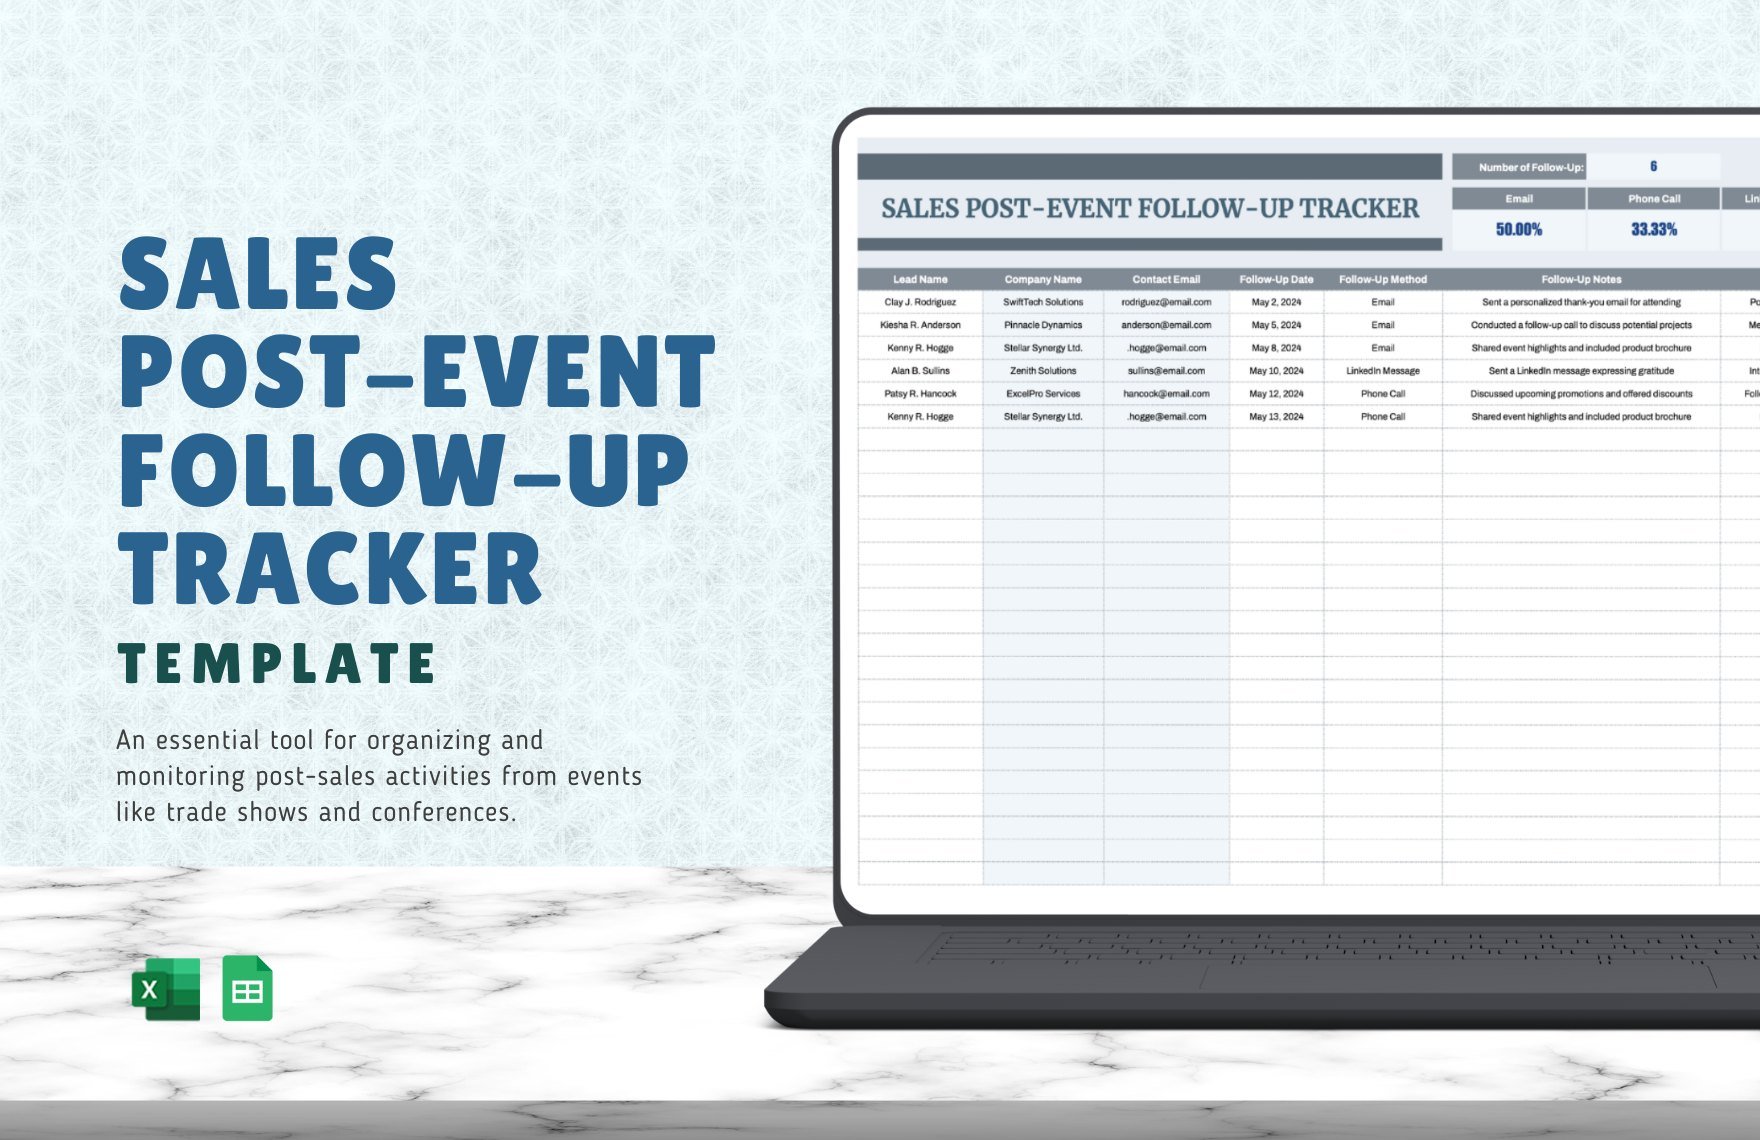 Sales Post-Event Follow-Up Tracker Template